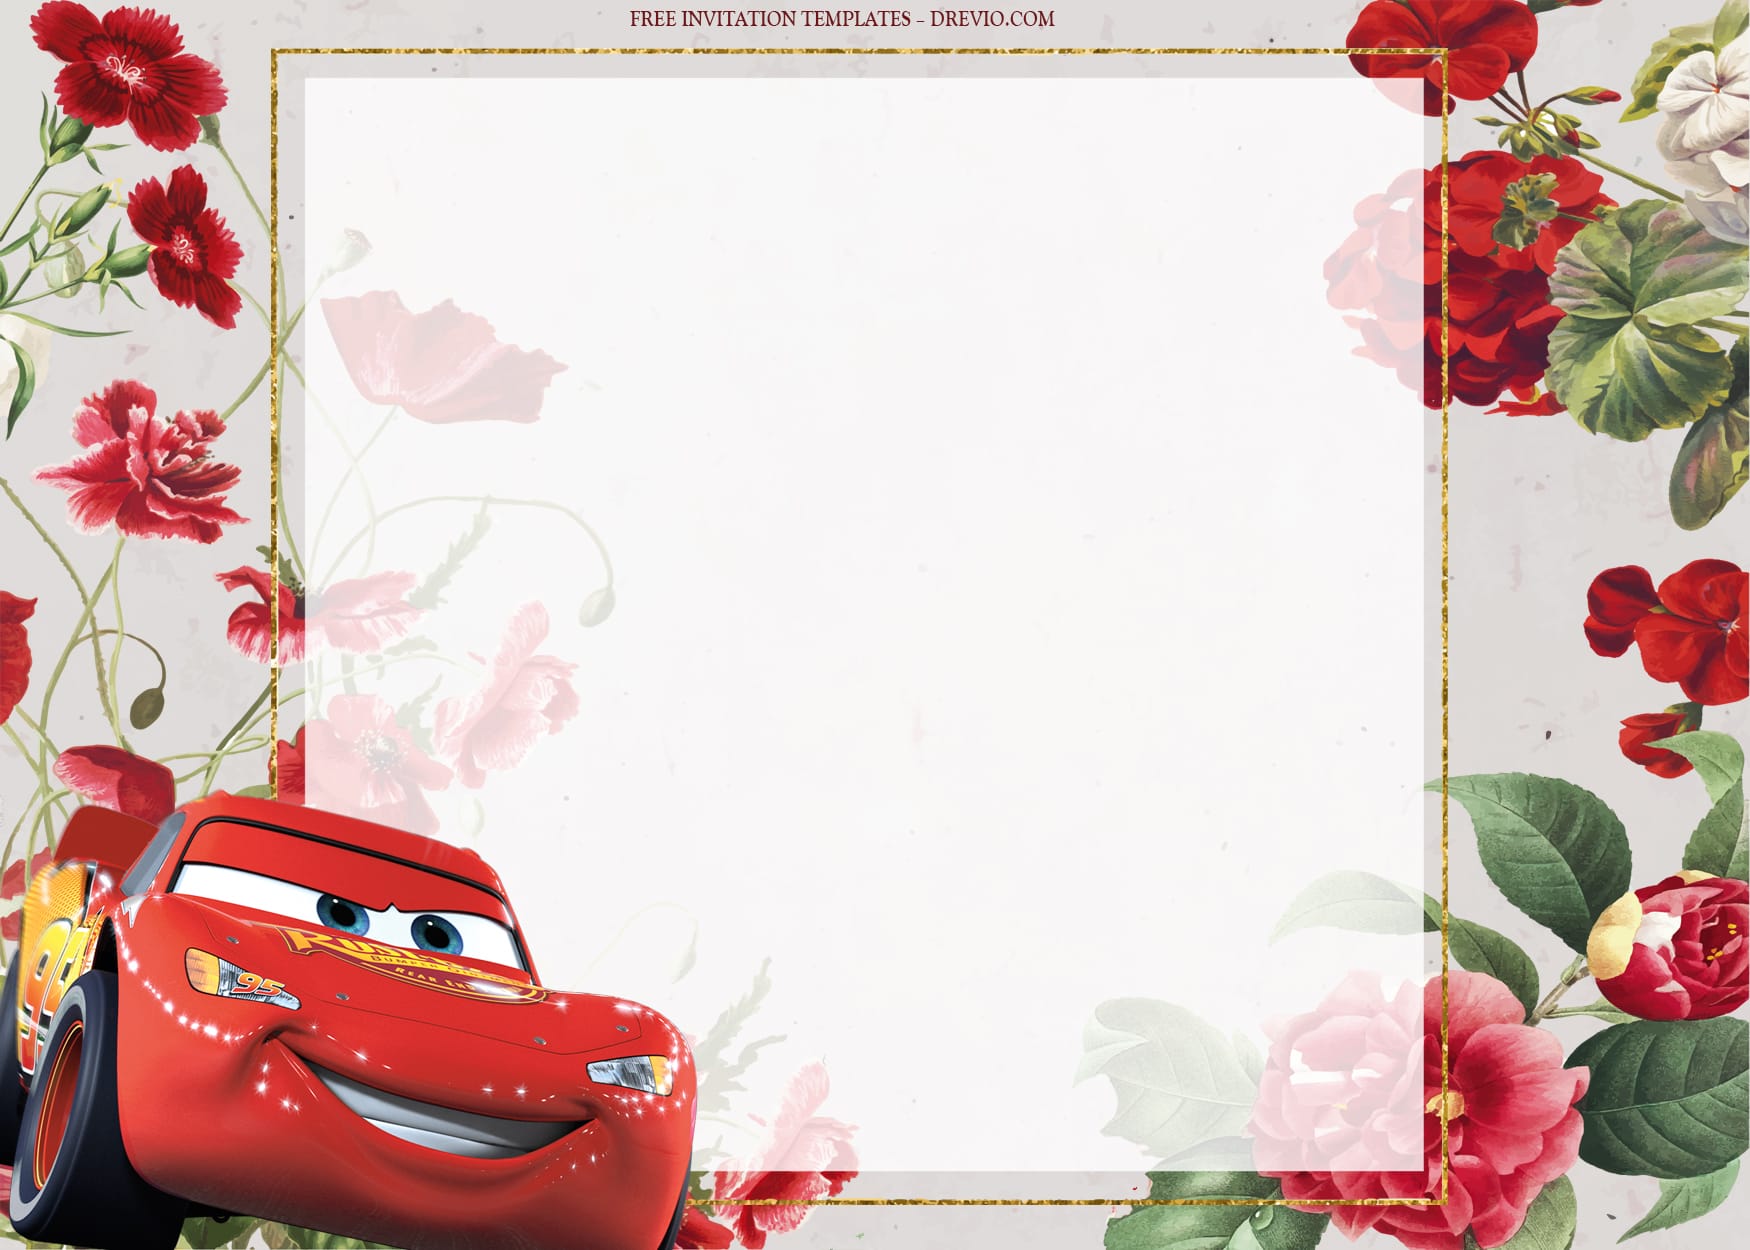 8+ The Cars Racing Through Highway Birthday Invitation Templates Type One